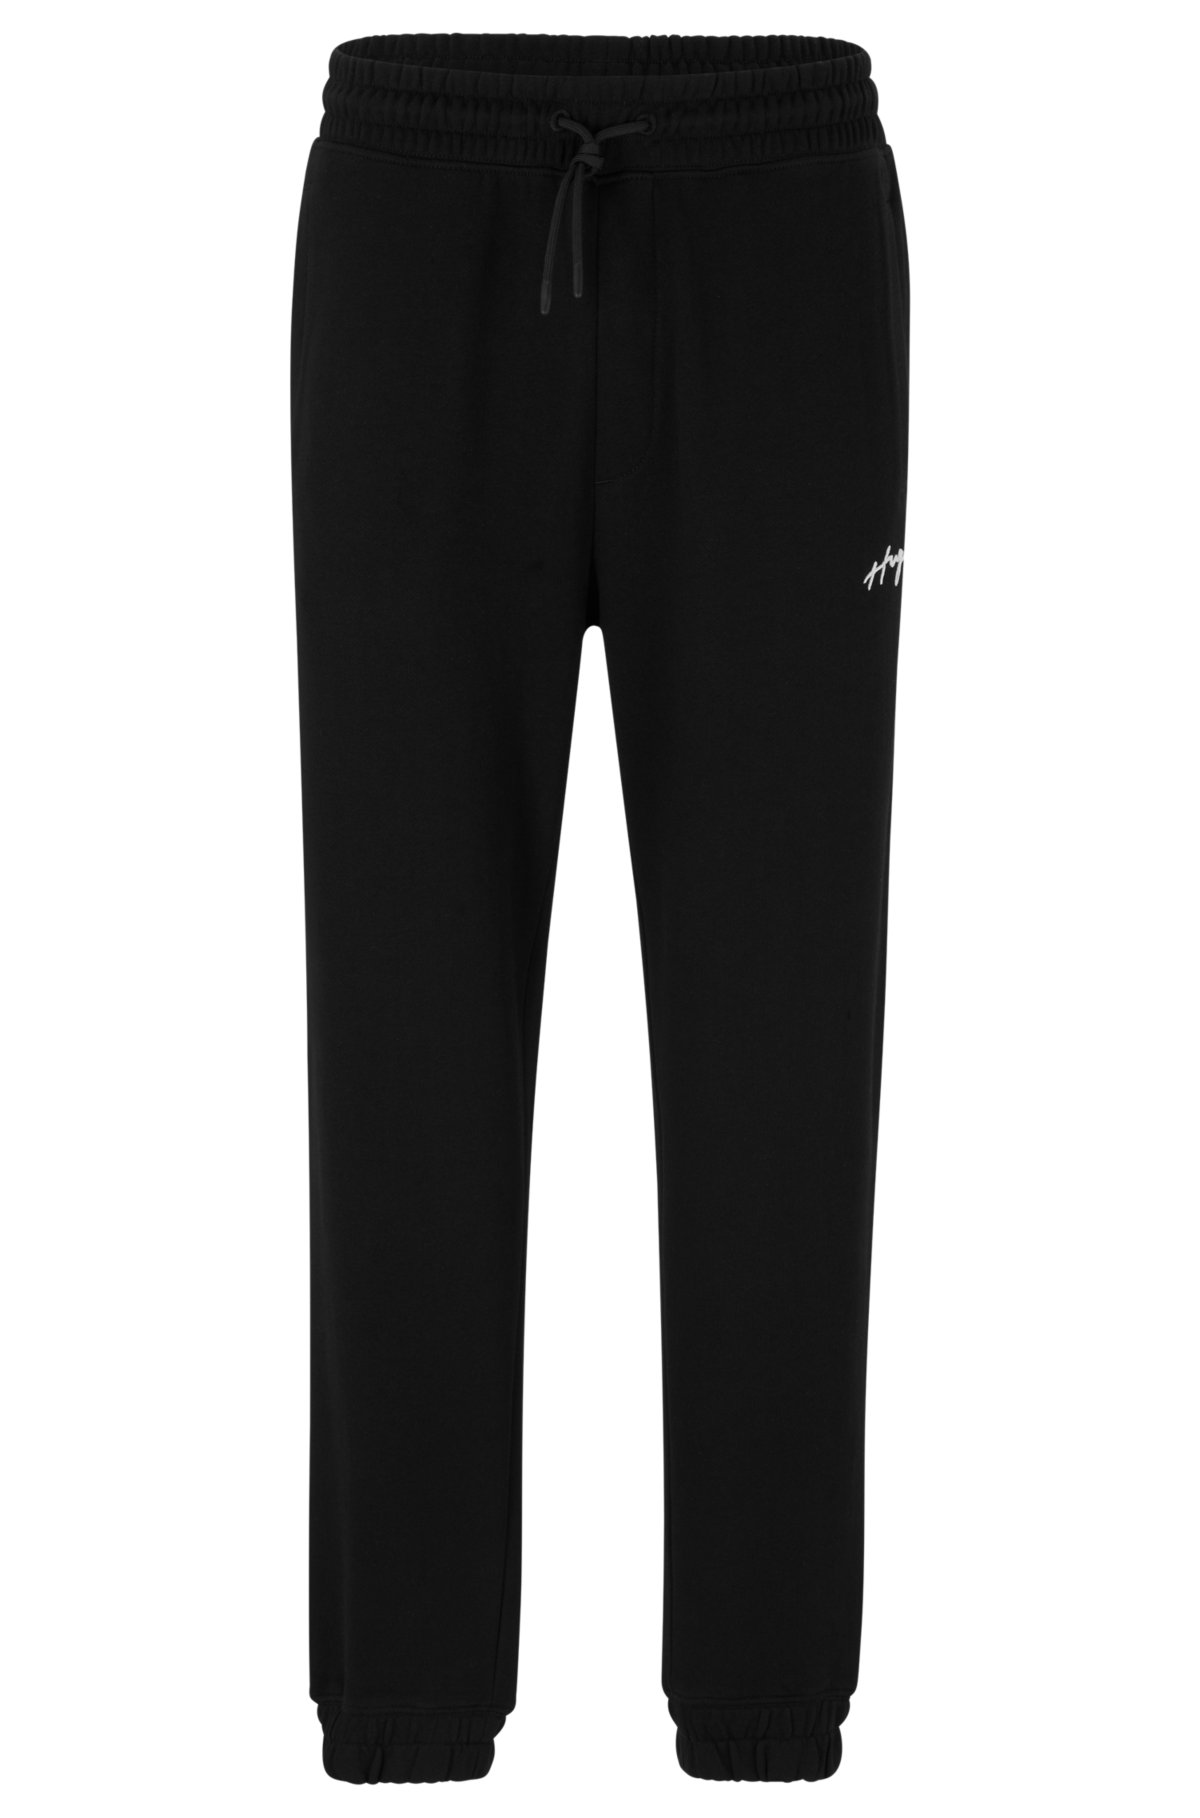 HUGO - Relaxed-fit cotton tracksuit with logo bottoms handwritten